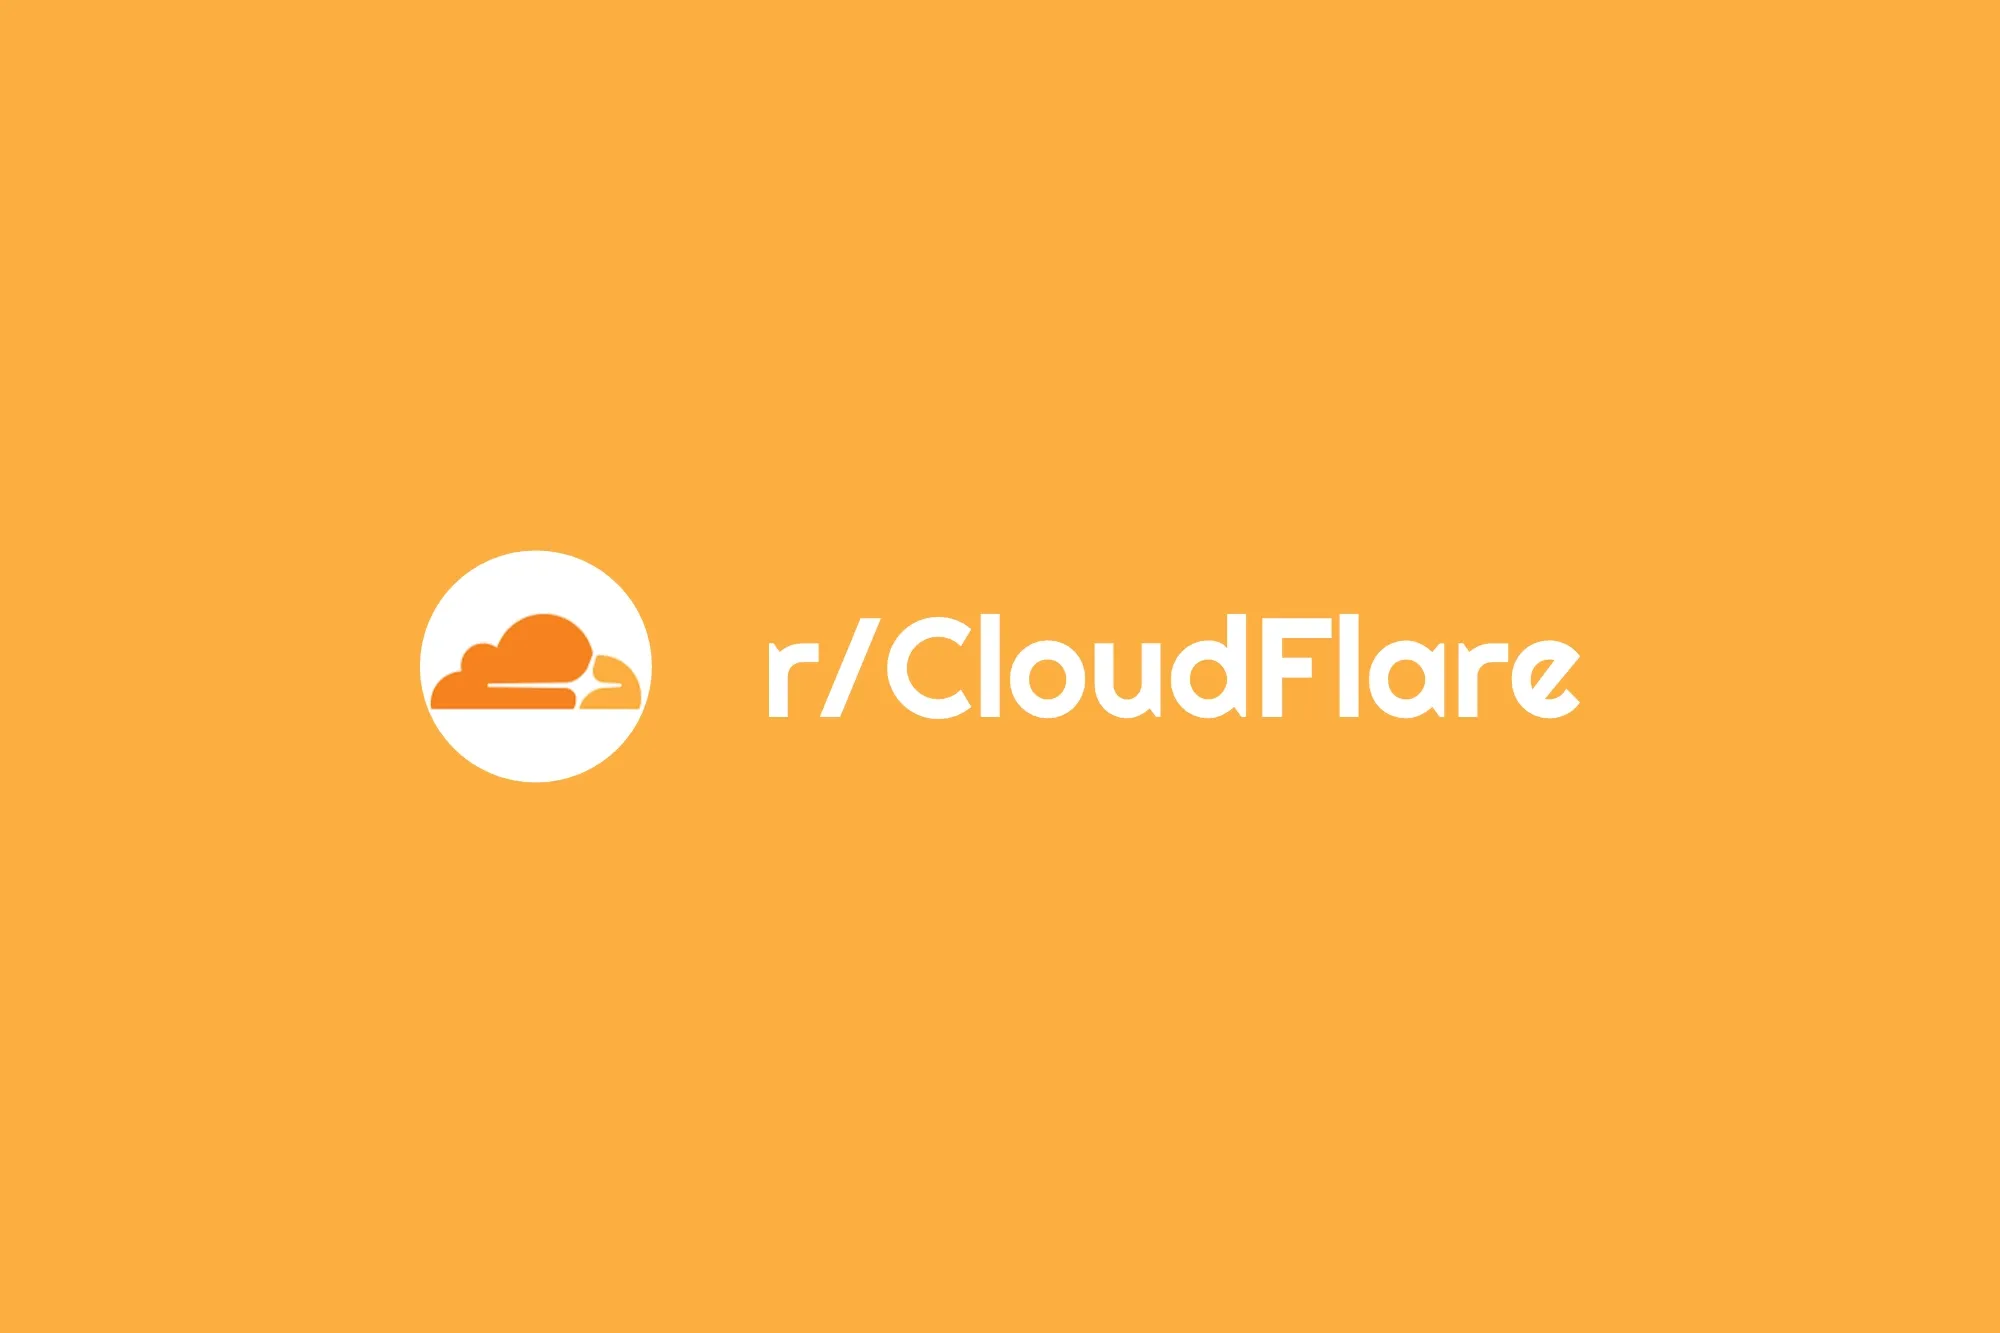 r/CloudFlare: Question about pointing Cloudflare domain record to another Cloudflare domain that is using third-party name servers (Wix)?